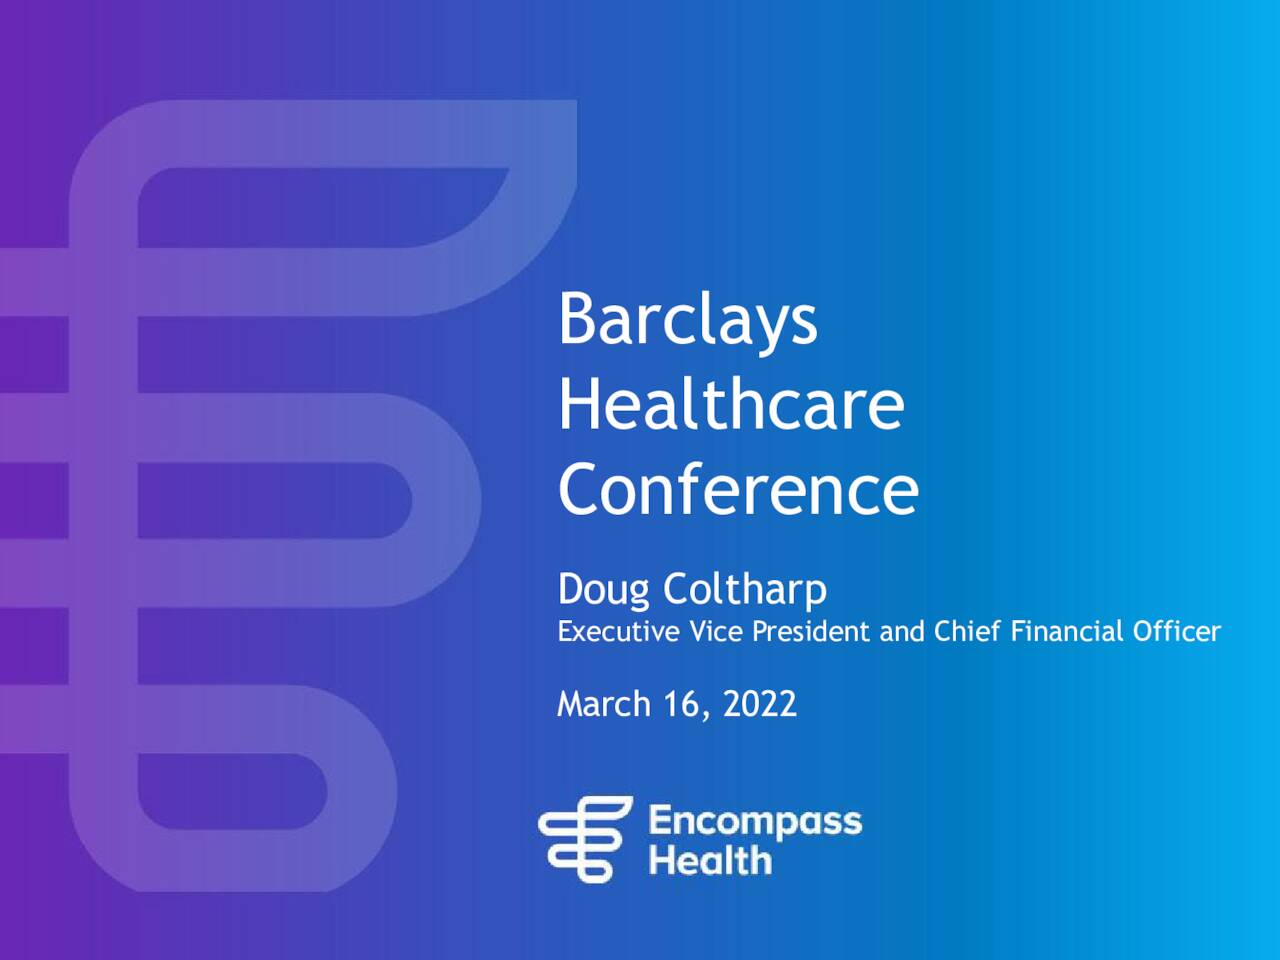 Health (EHC) presents at Barclays Healthcare Conference